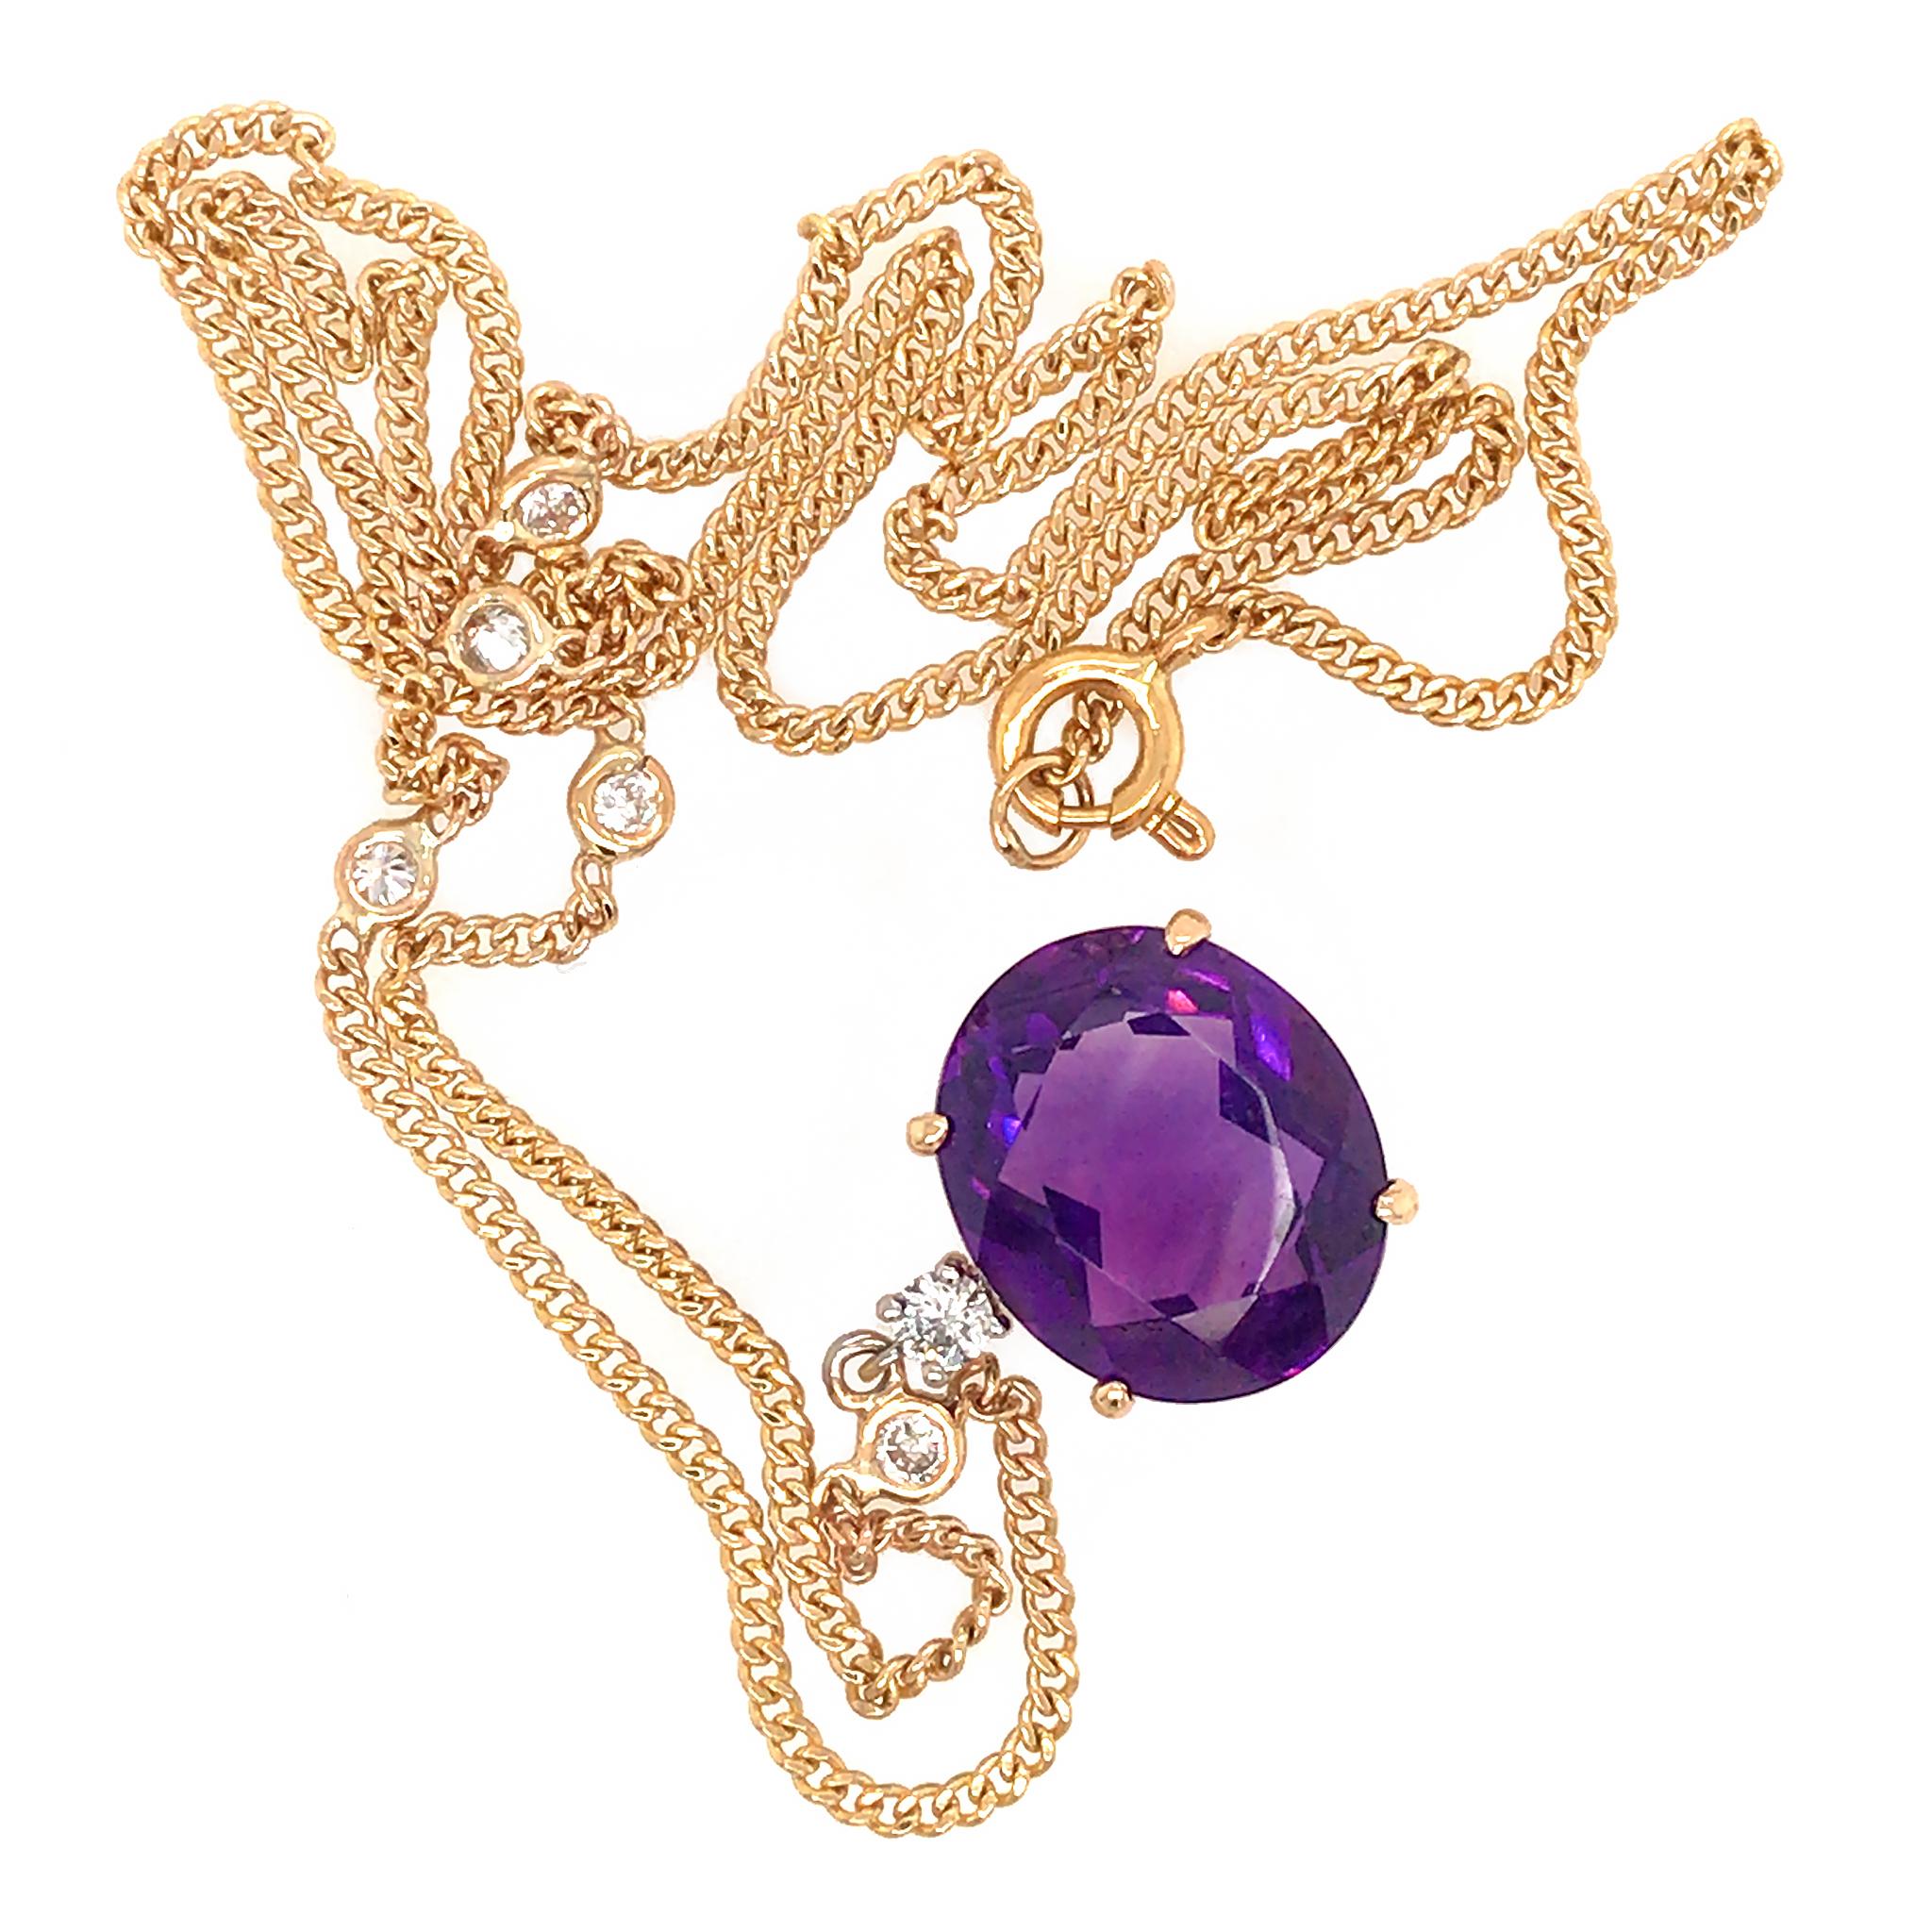 Round Cut Lovely 14k Yellow Gold Amethyst Pendant with Diamond by the Yard Necklace